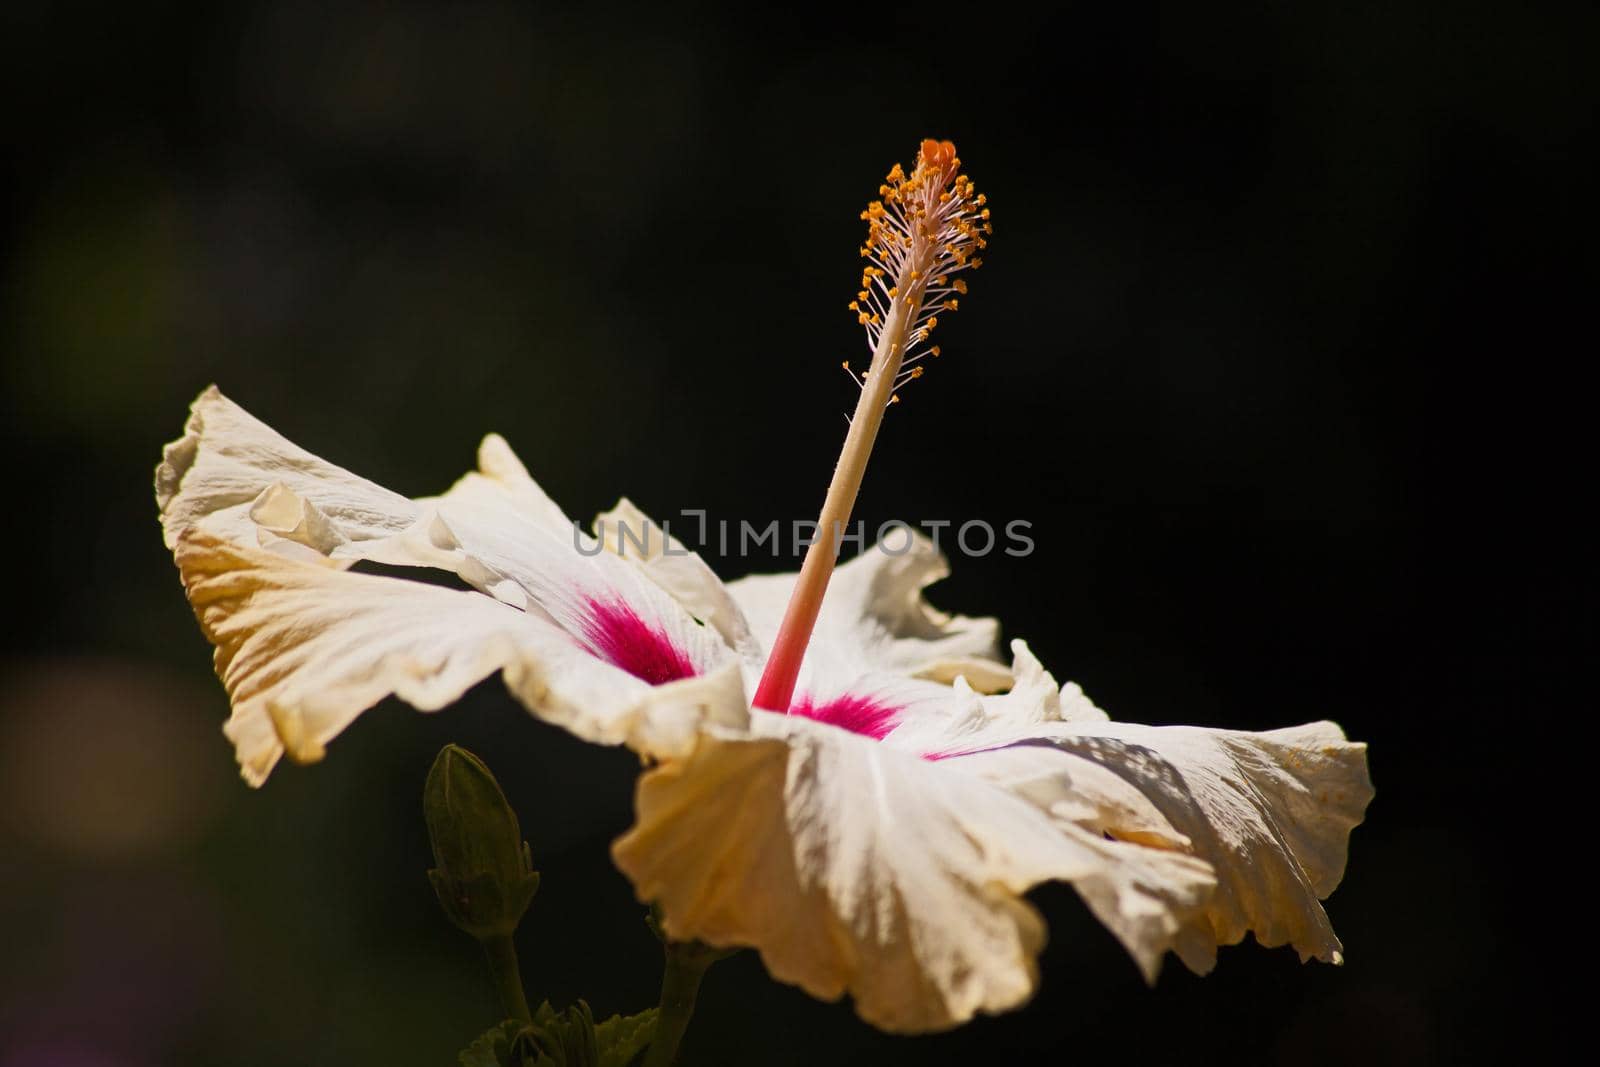 Macro image of a single yellow Hibiscus flower isolated on a dark background